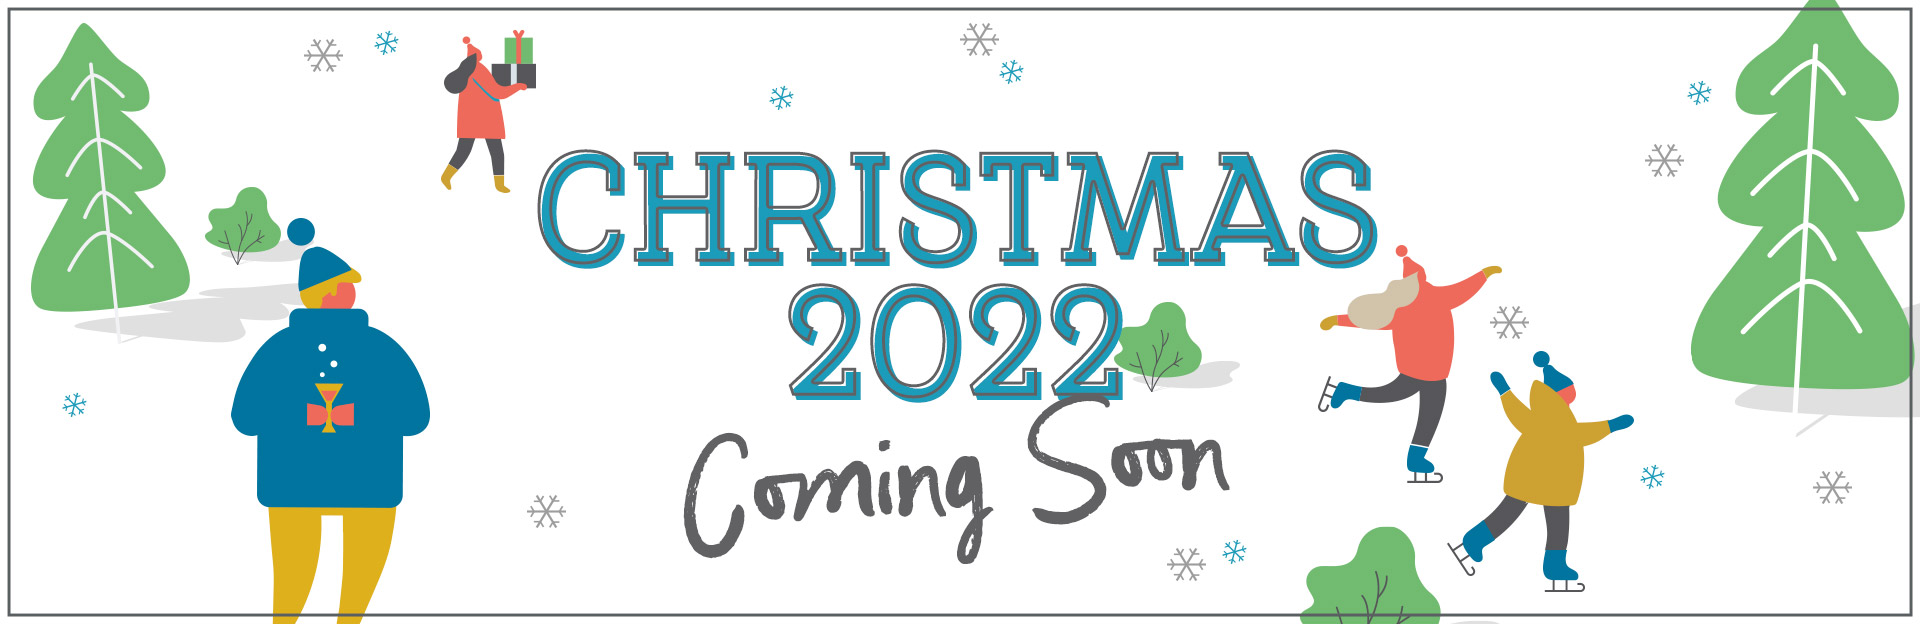 Christmas 2021 at Mons| Great Value Family Food